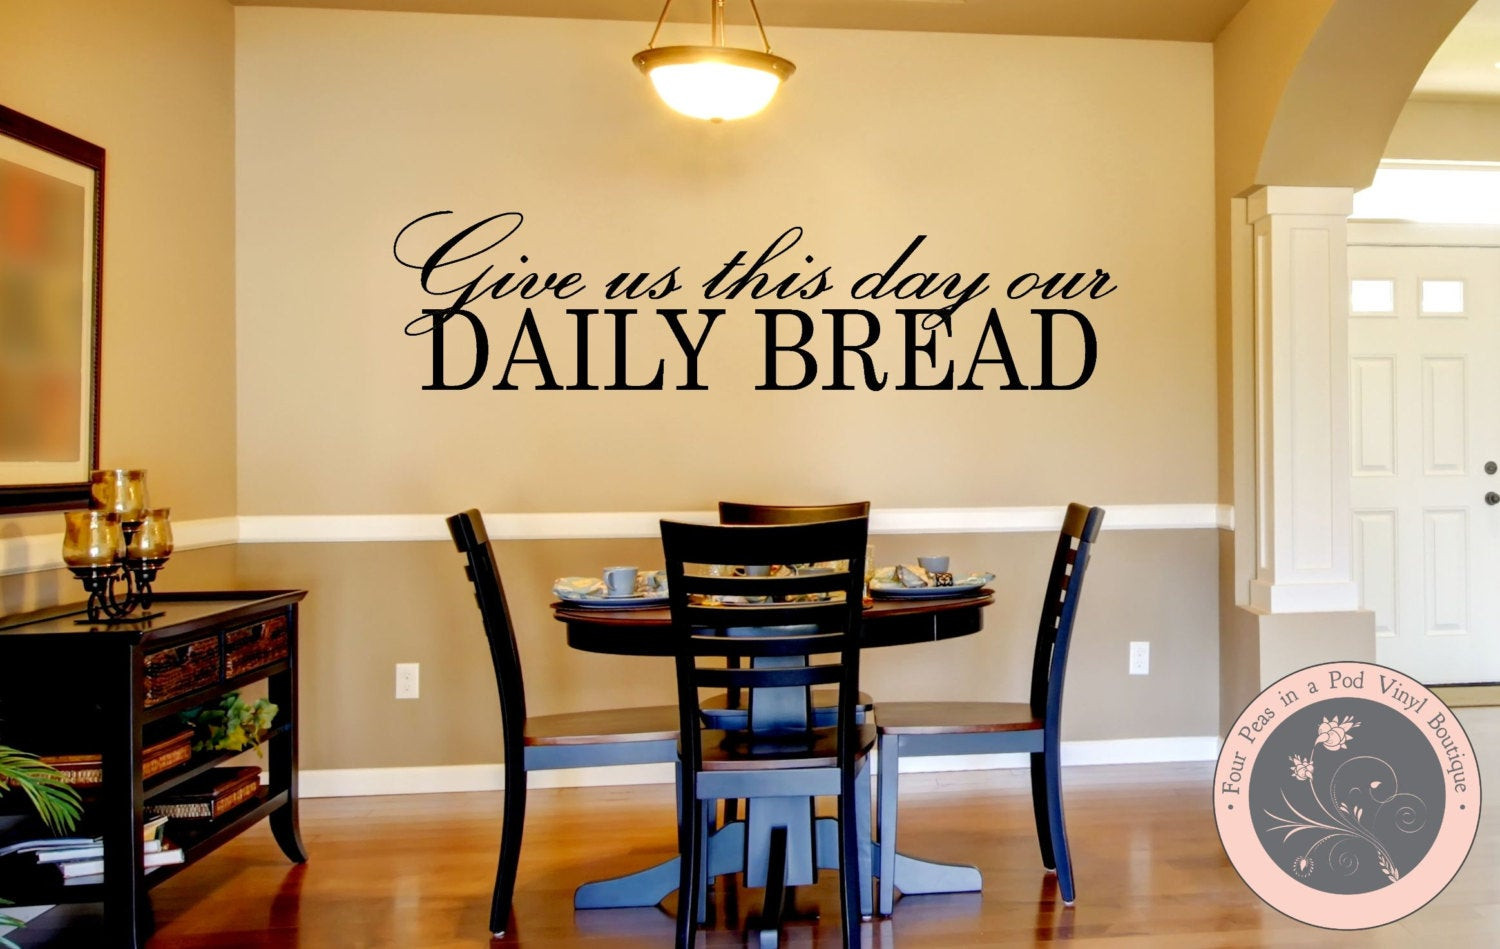 Wall Art For The Kitchen
 Kitchen Decor Kitchen Wall Decal Christian Wall Decal